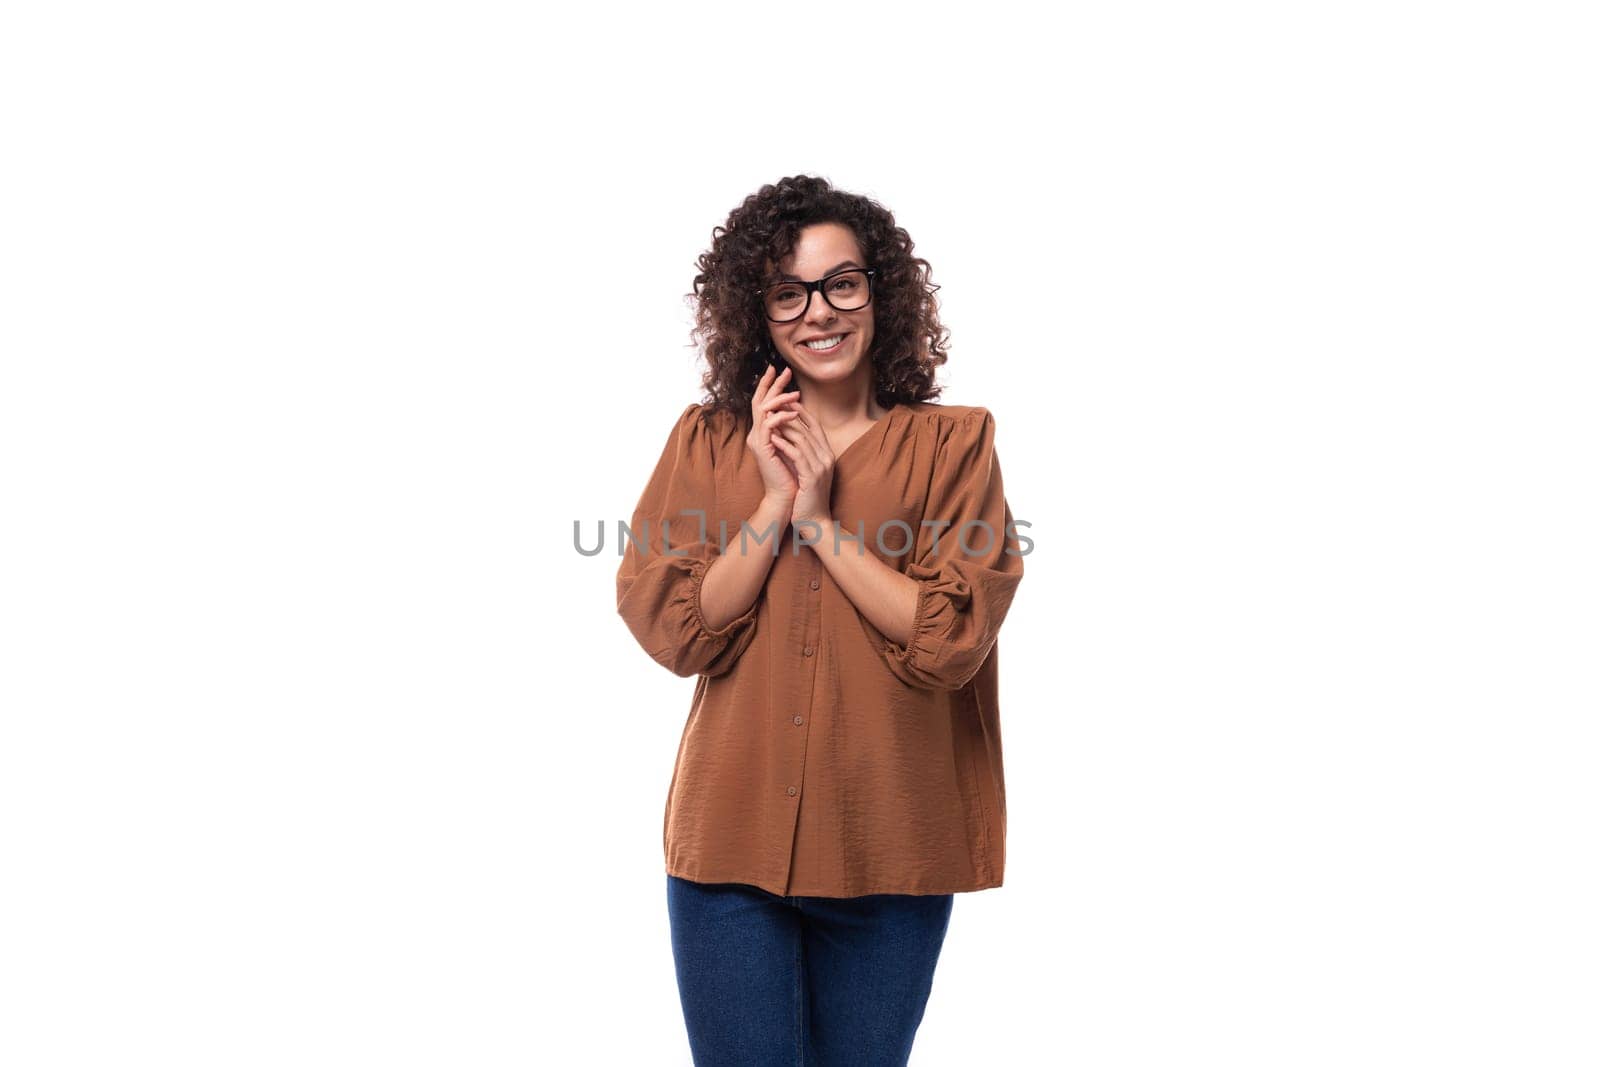 young positive cheerful slender woman with curls dressed in a brown blouse.